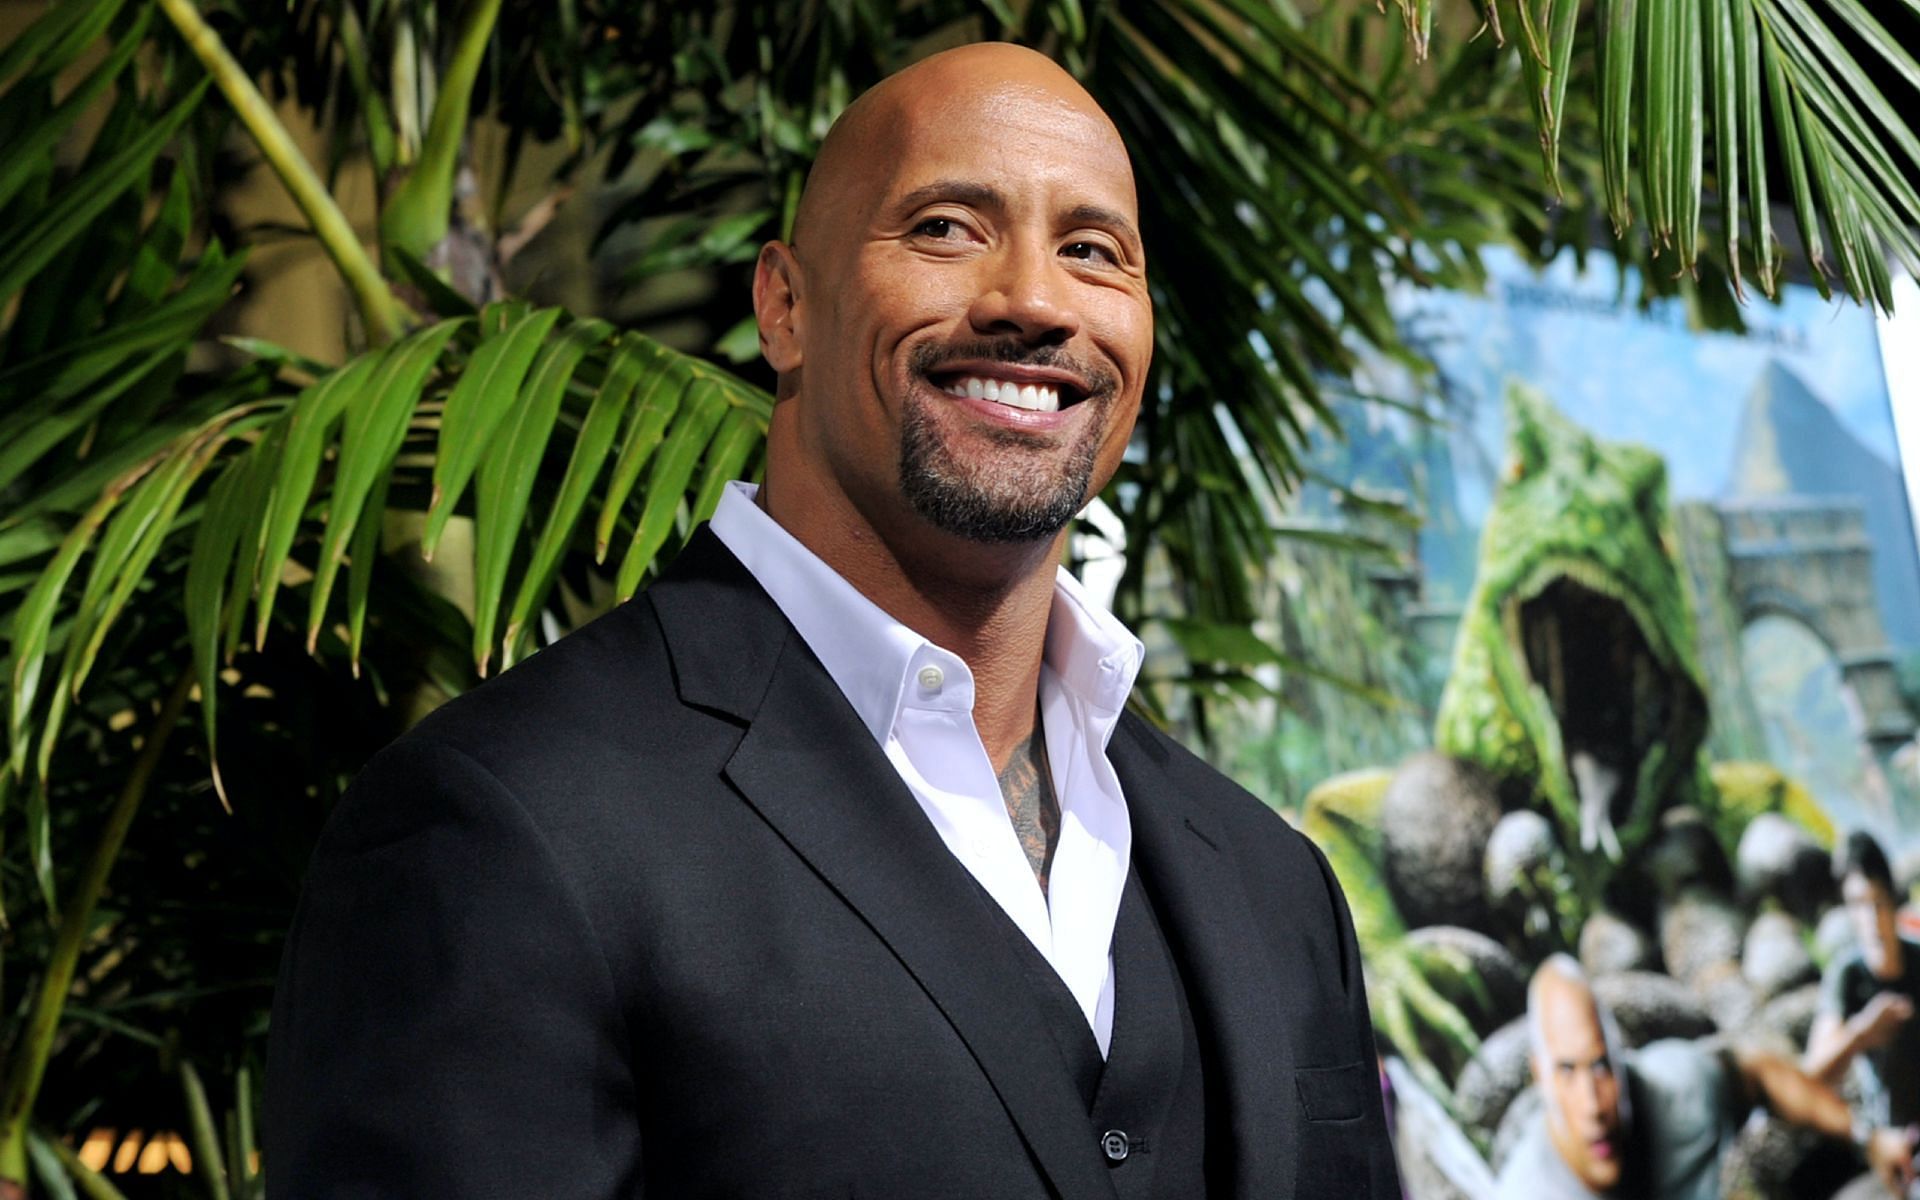 Dwayne Johnson reacts to old friend